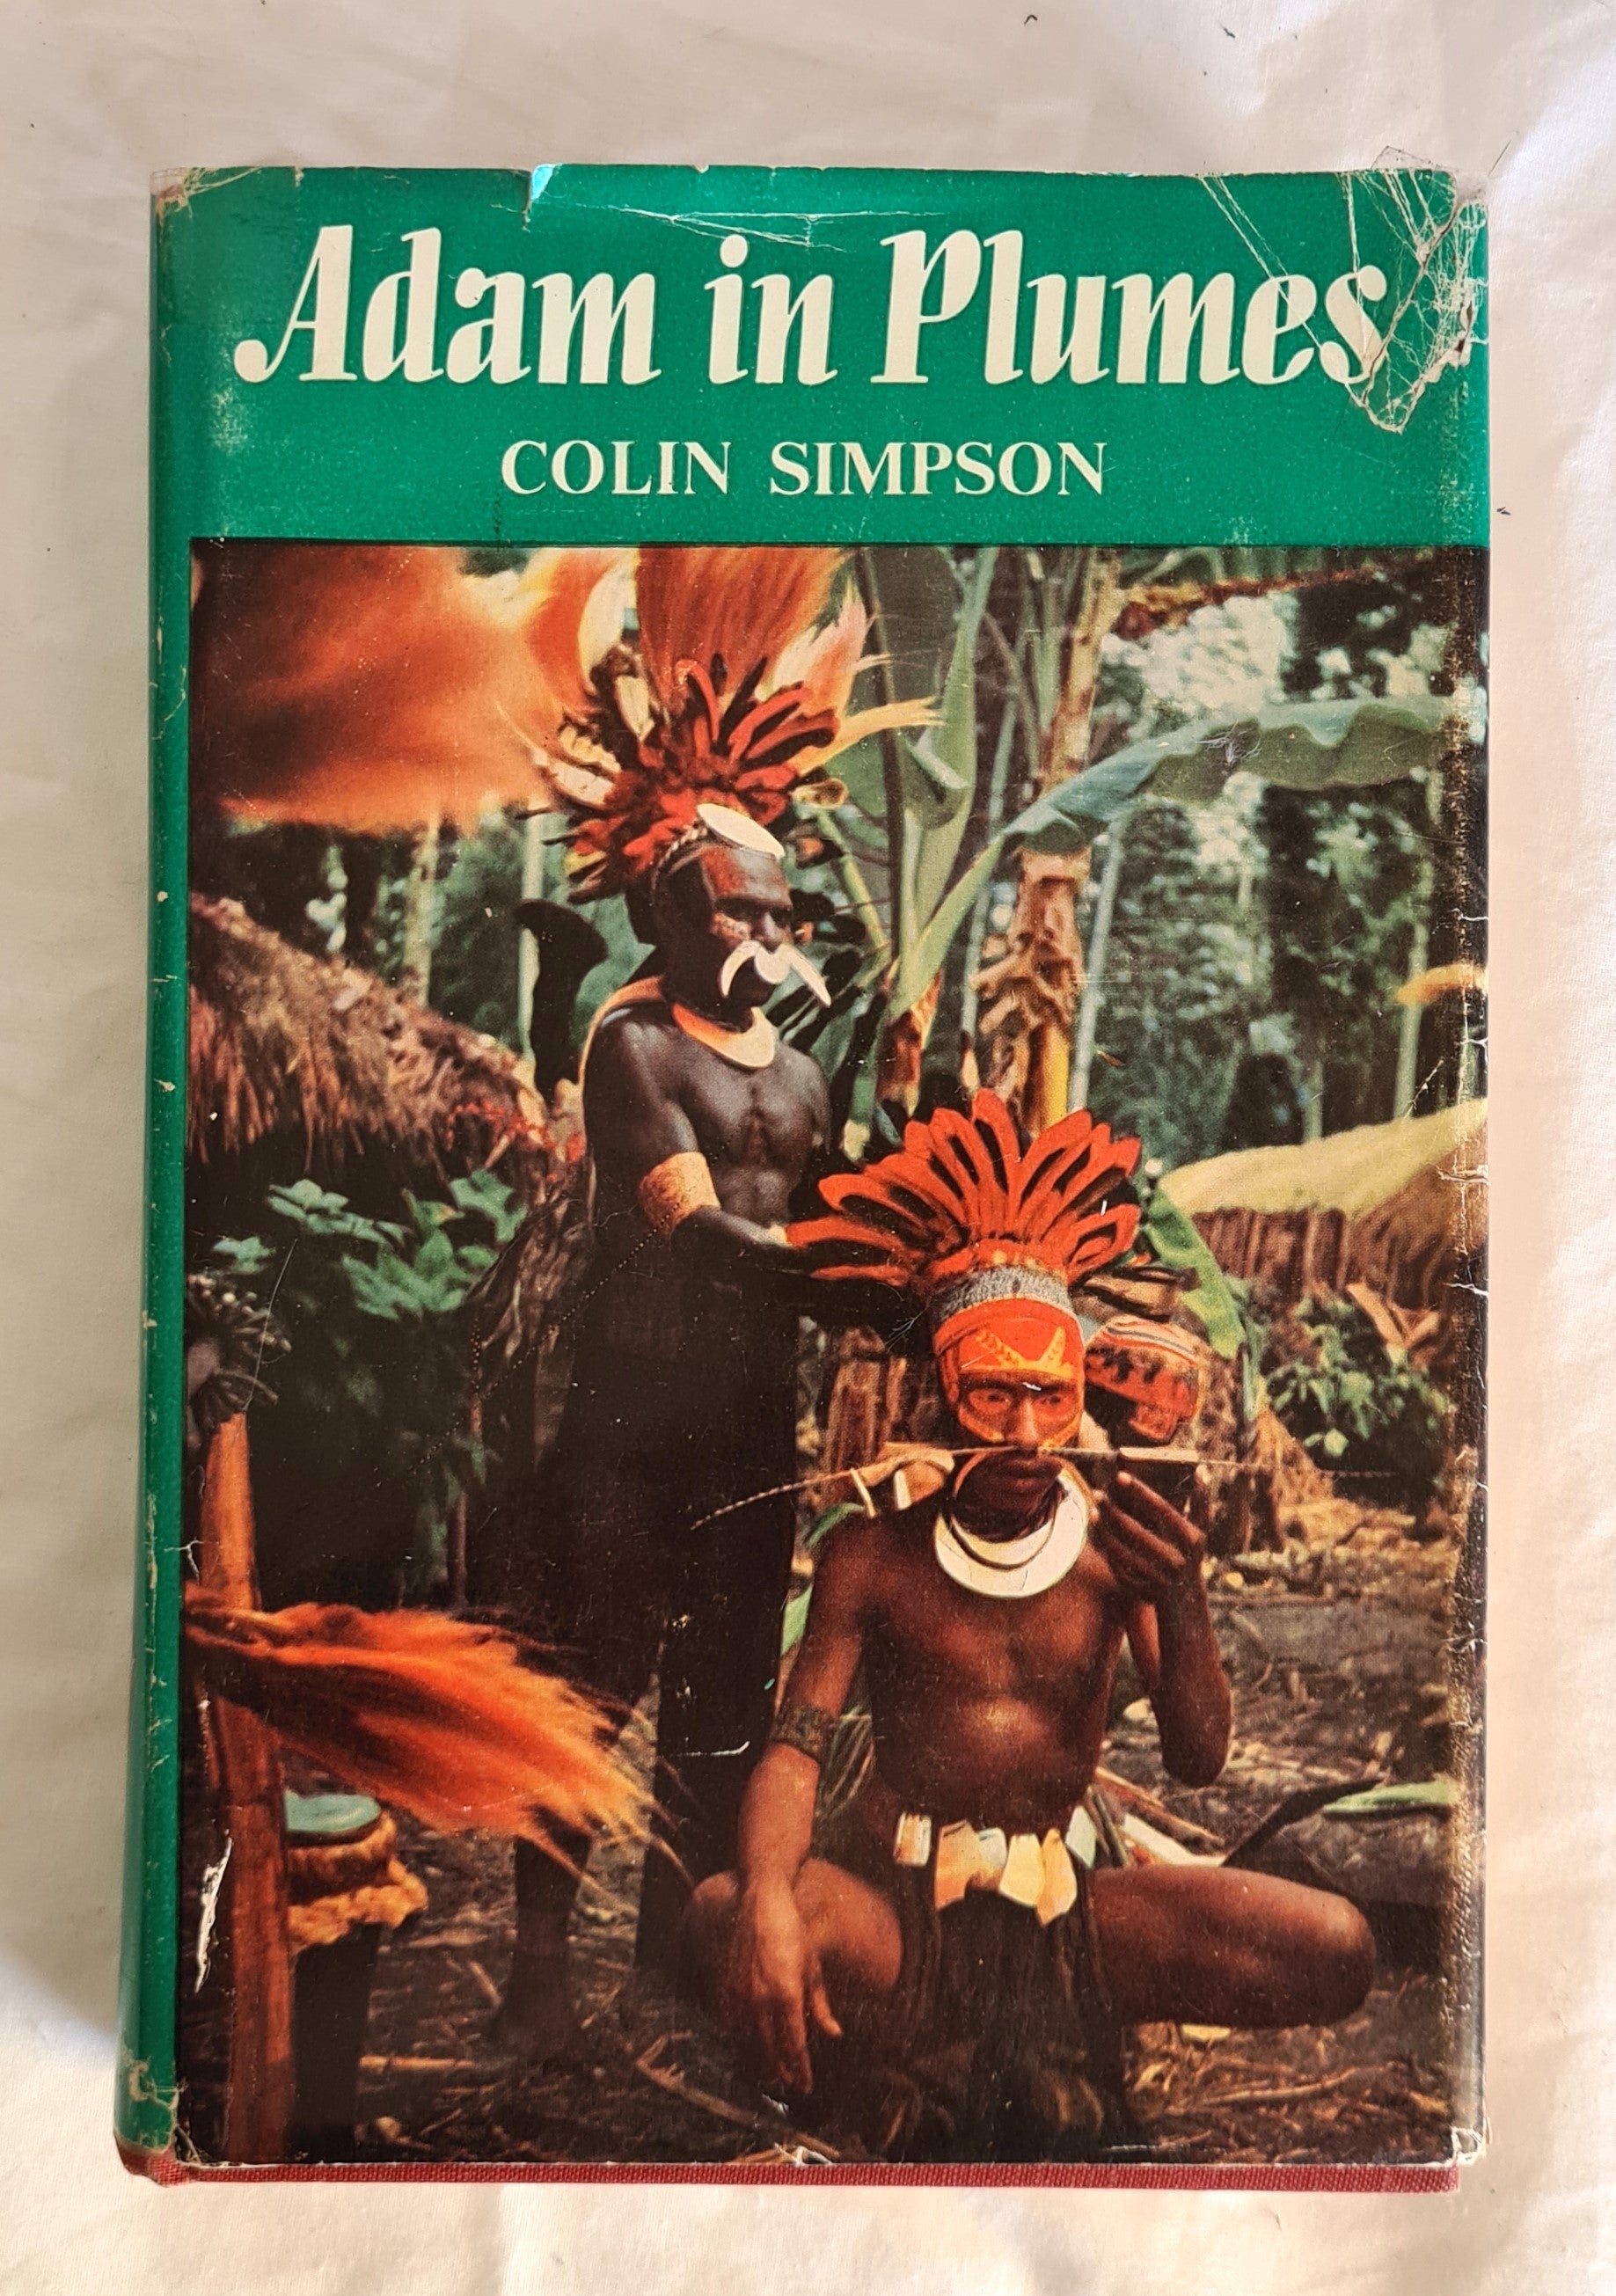 Adam in Plumes  by Colin Simpson